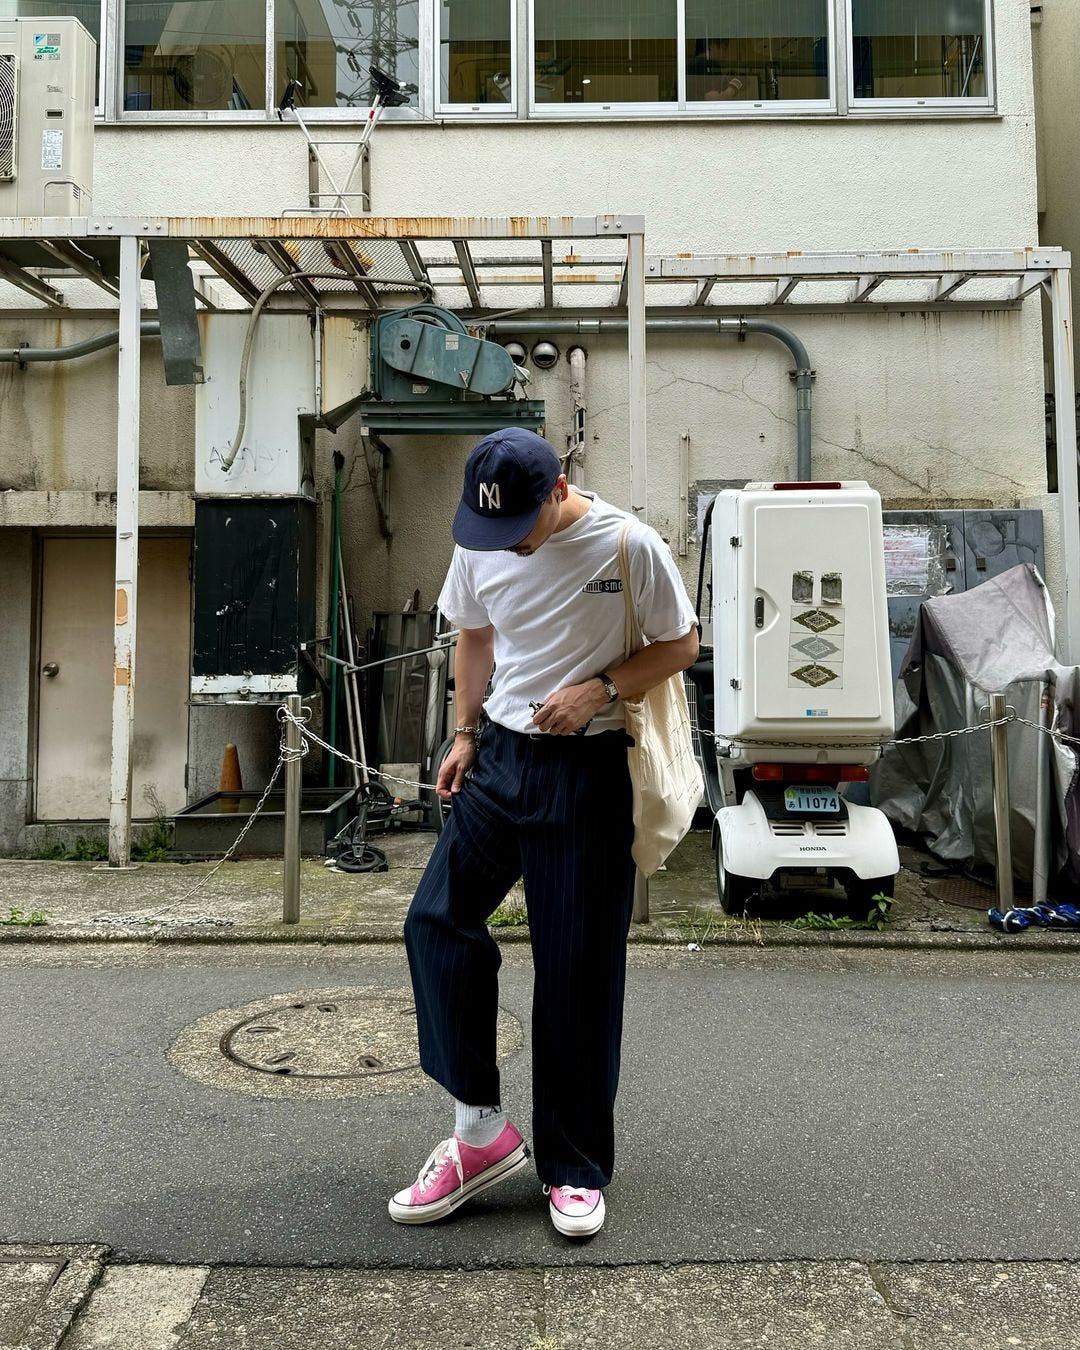 man standing in an alley wearing a blue baseball cap, white t-shirt, navy pants and pink sneakers